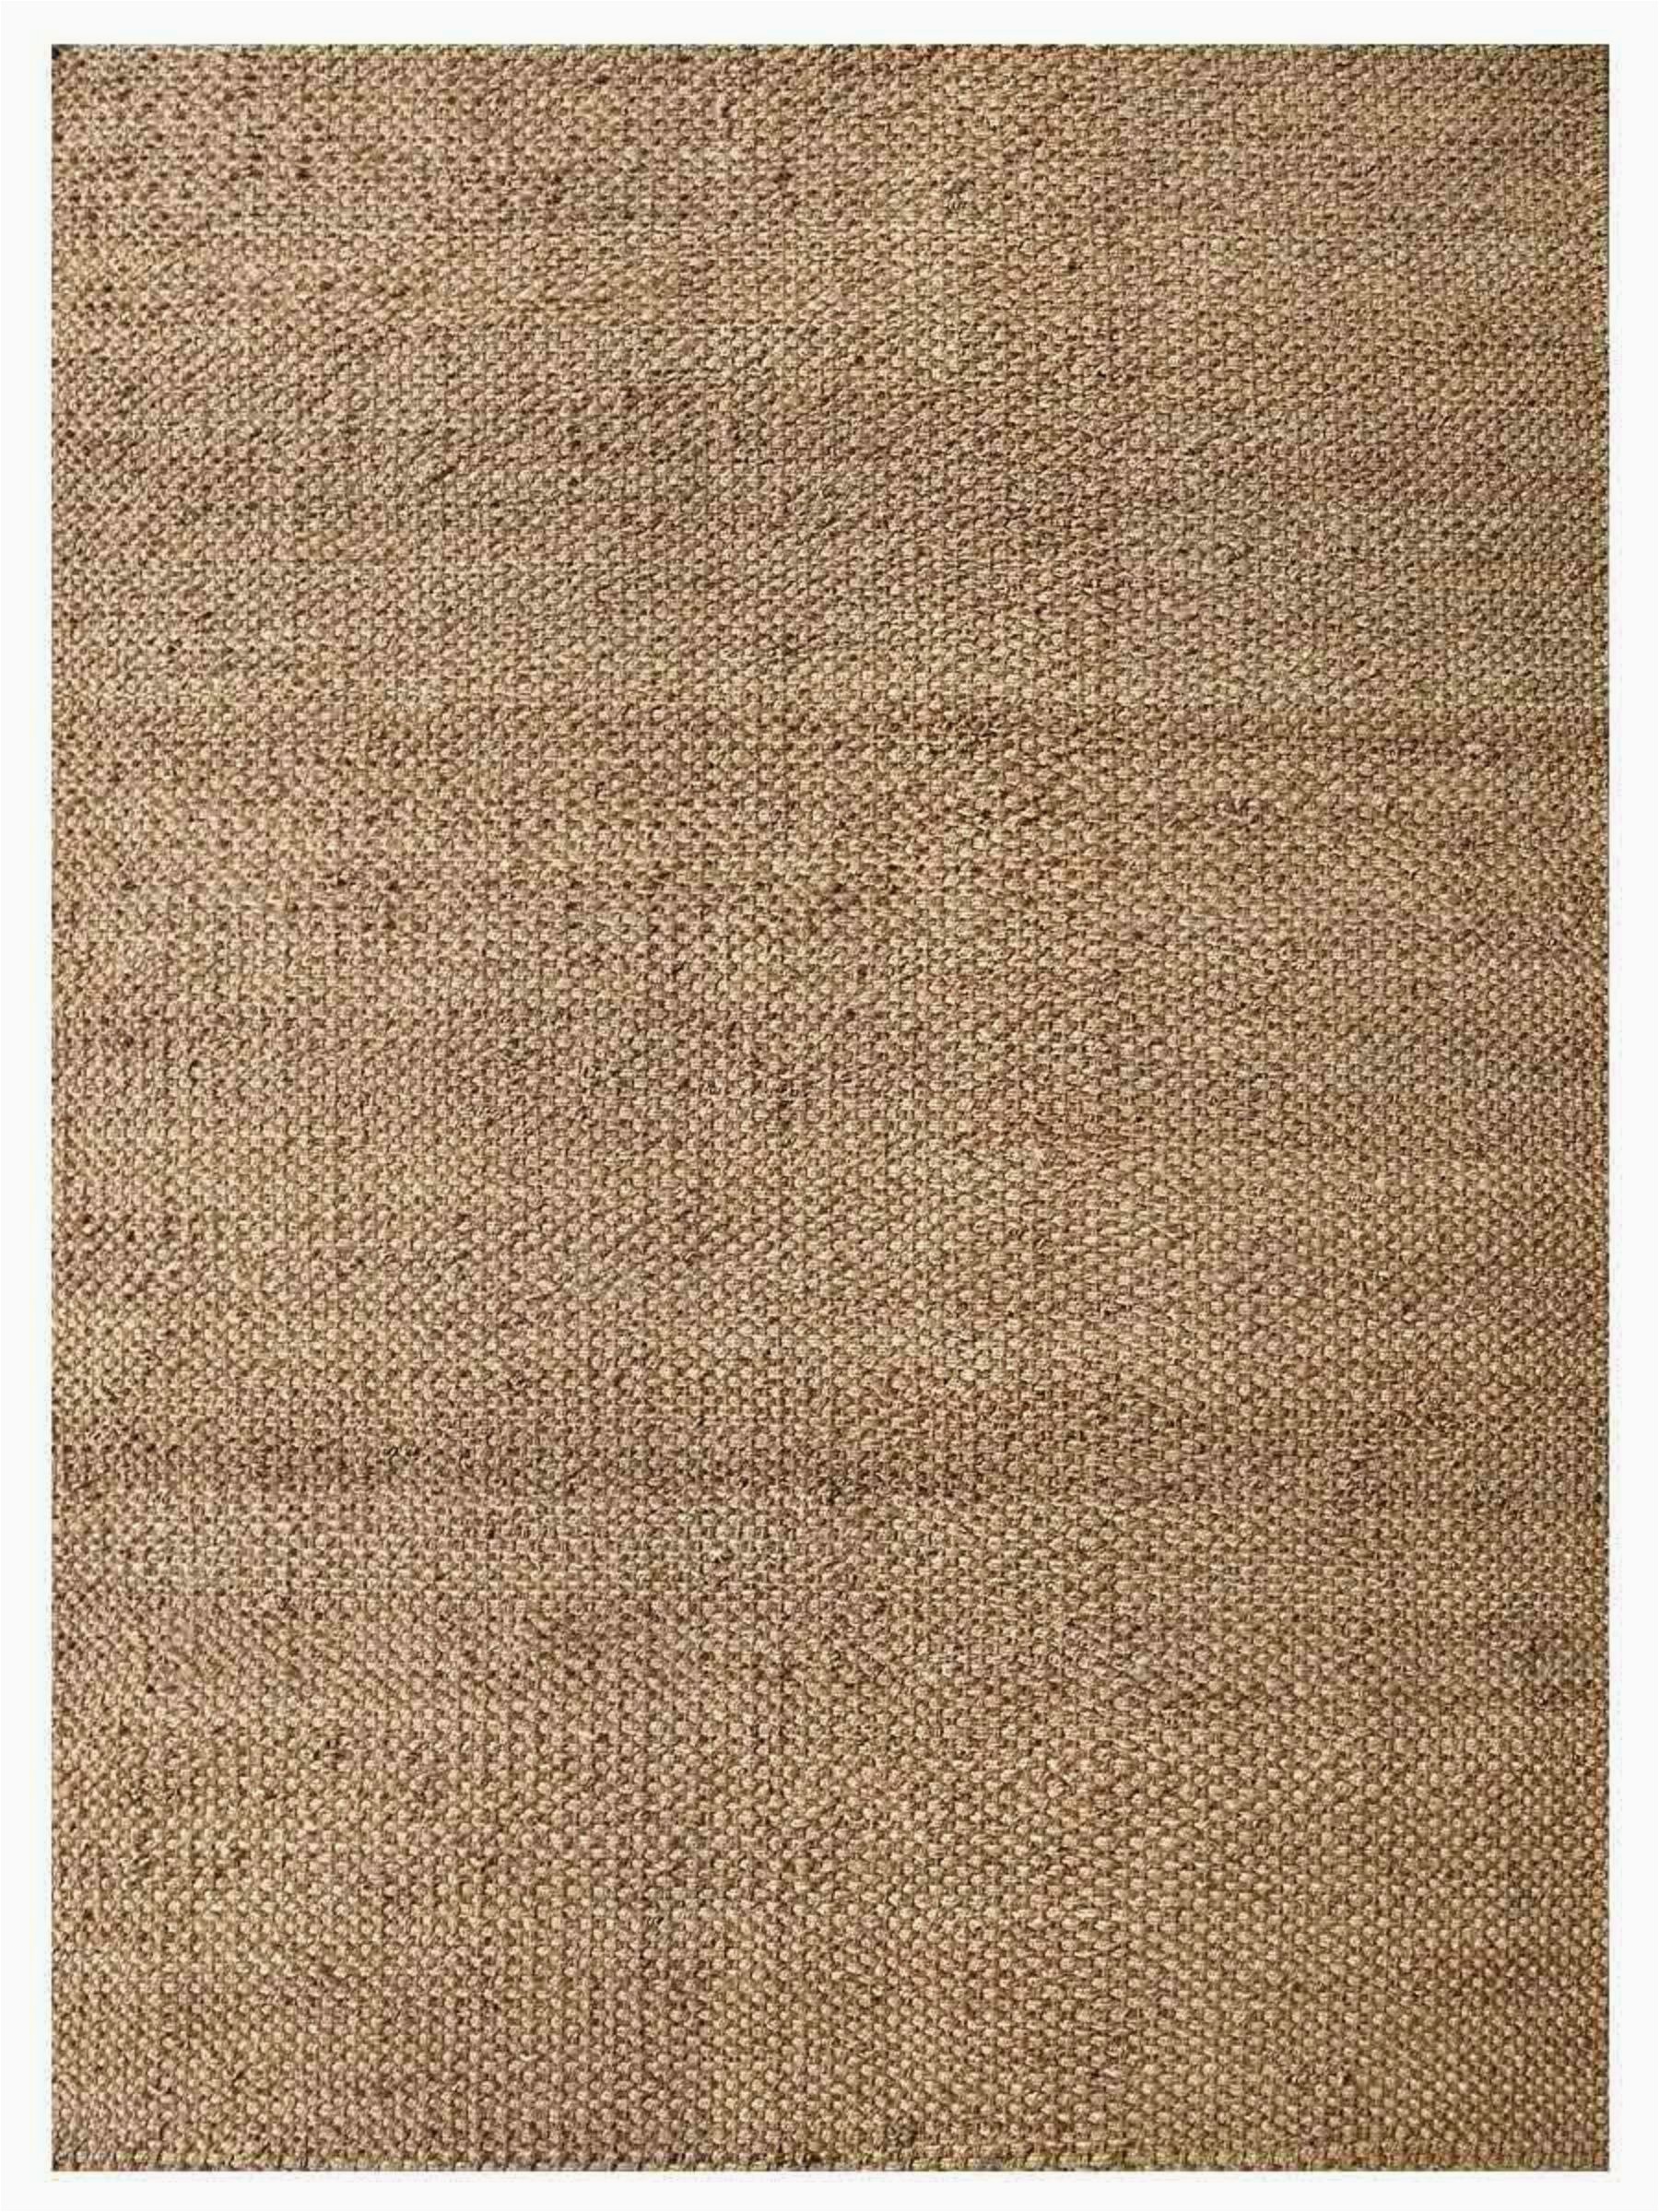 Safavieh Natural Fiber Carrie Braided area Rug Cozette Hand Knotted Natural area Rug